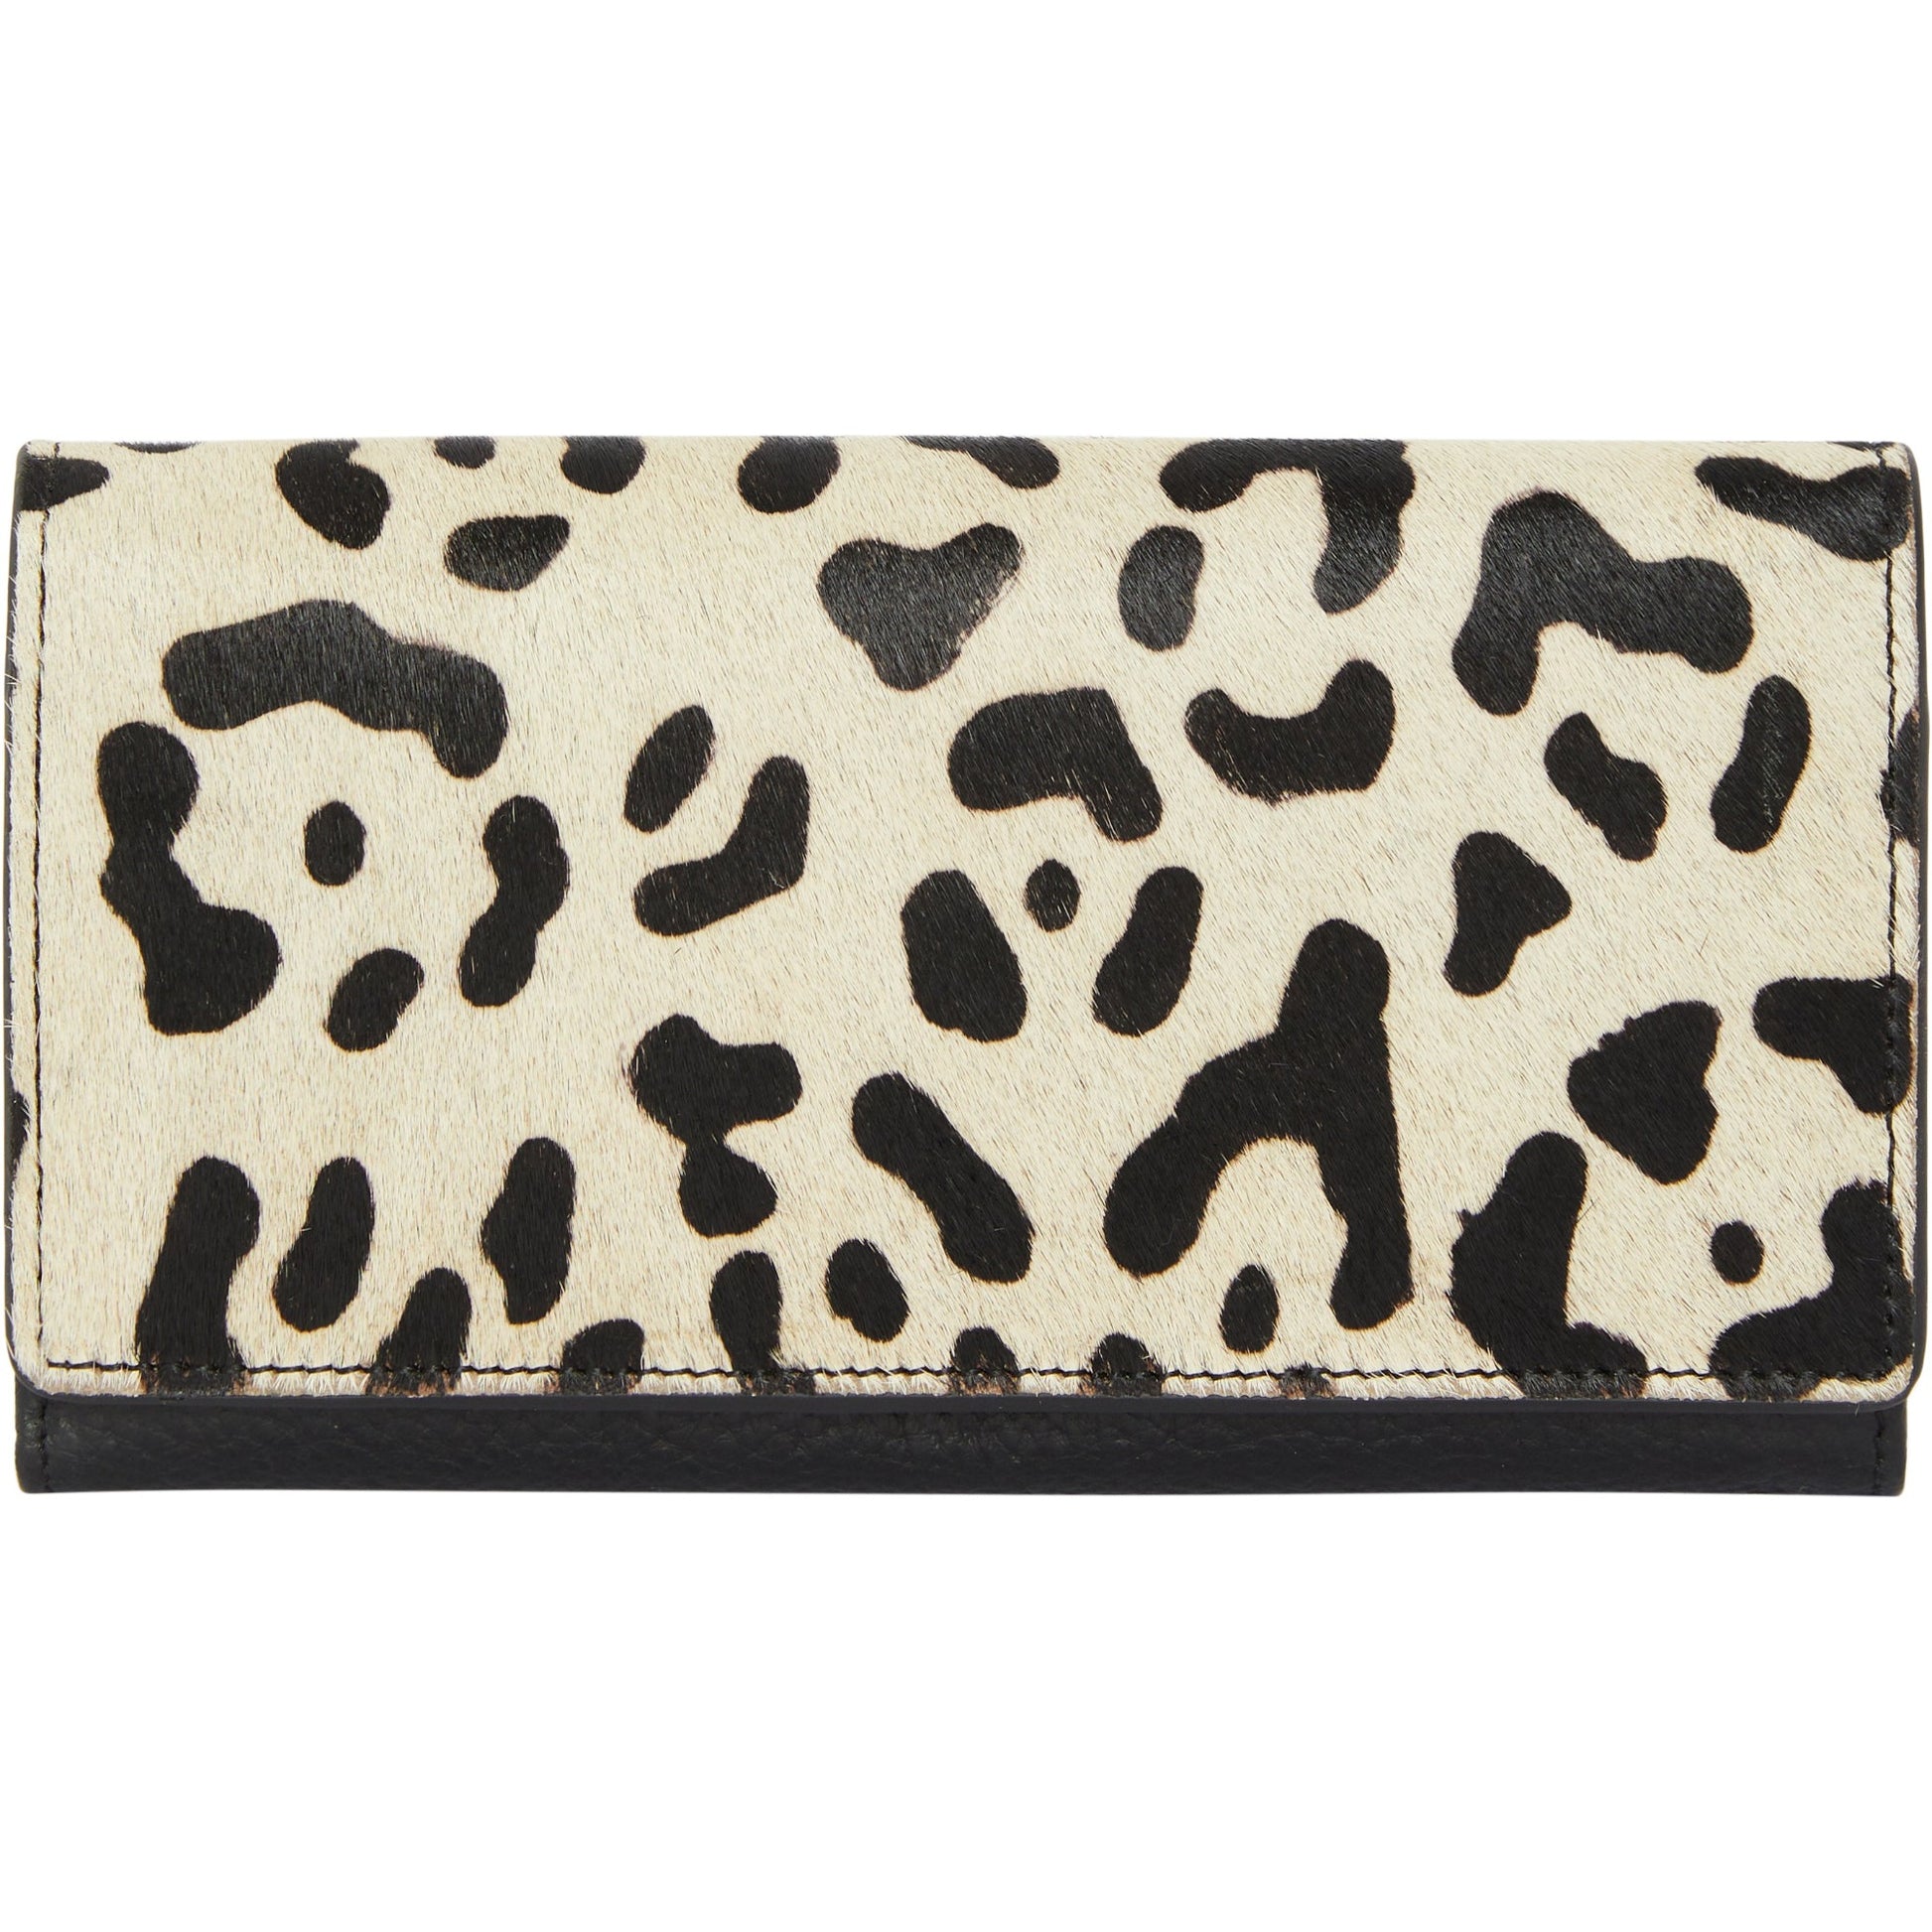 Ivory Animal Print Leather Multi Section Purse Brix and Bailey at Sostter